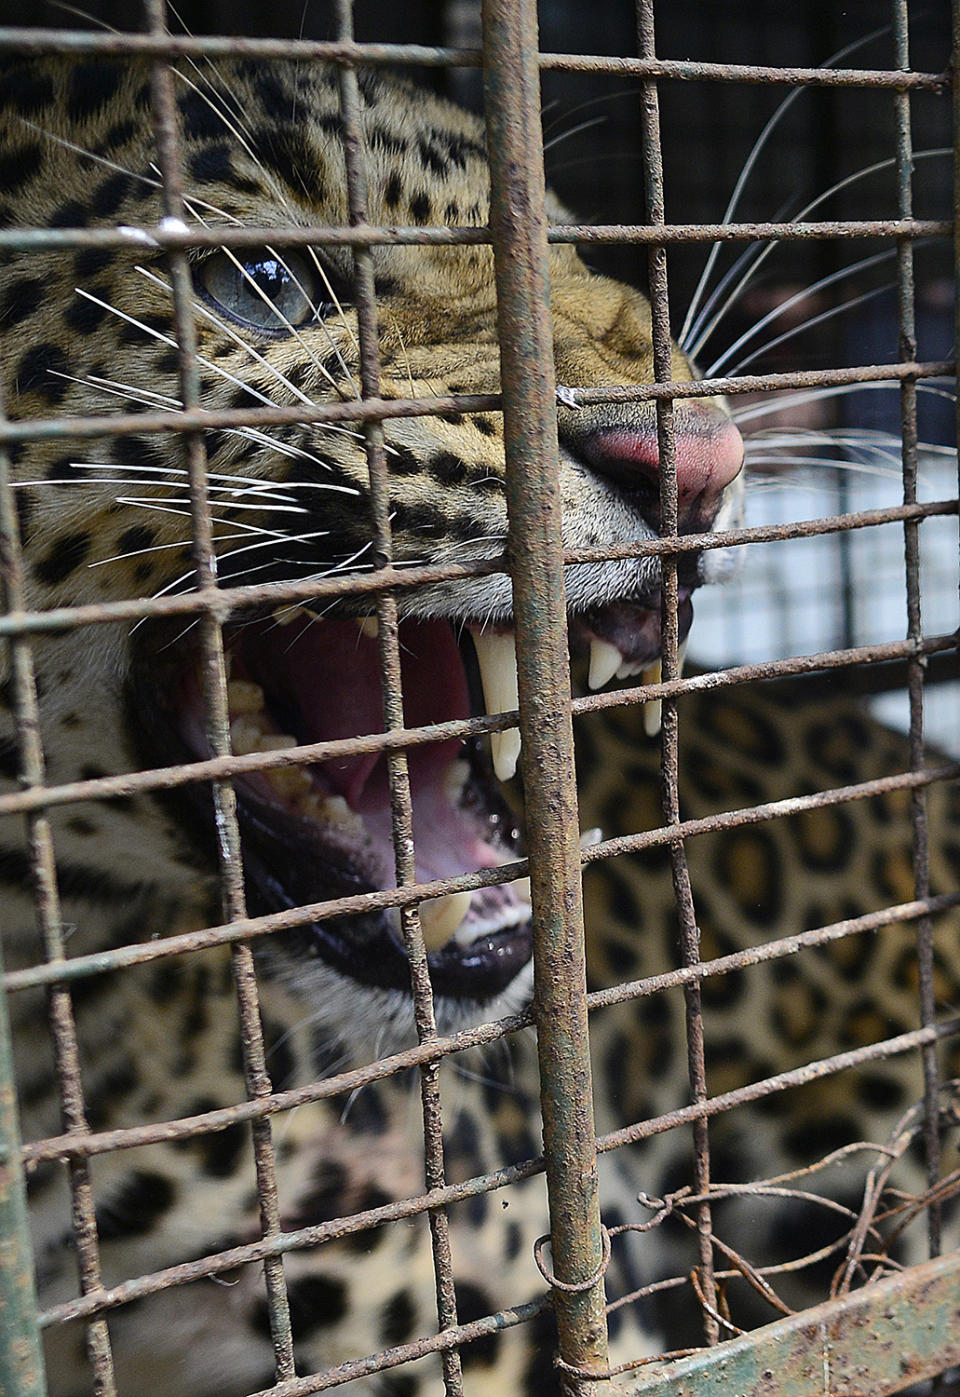 <p>A Leopard captured by the Guwahati zoo officials, sits inside a cage in Rosina village in Kamrup district of Assam state, India, Feb. 22, 2017. The leopard entered the village in early morning hours, apparenty in search for food, and injured three villagers. (Photo: EPA/STR) </p>